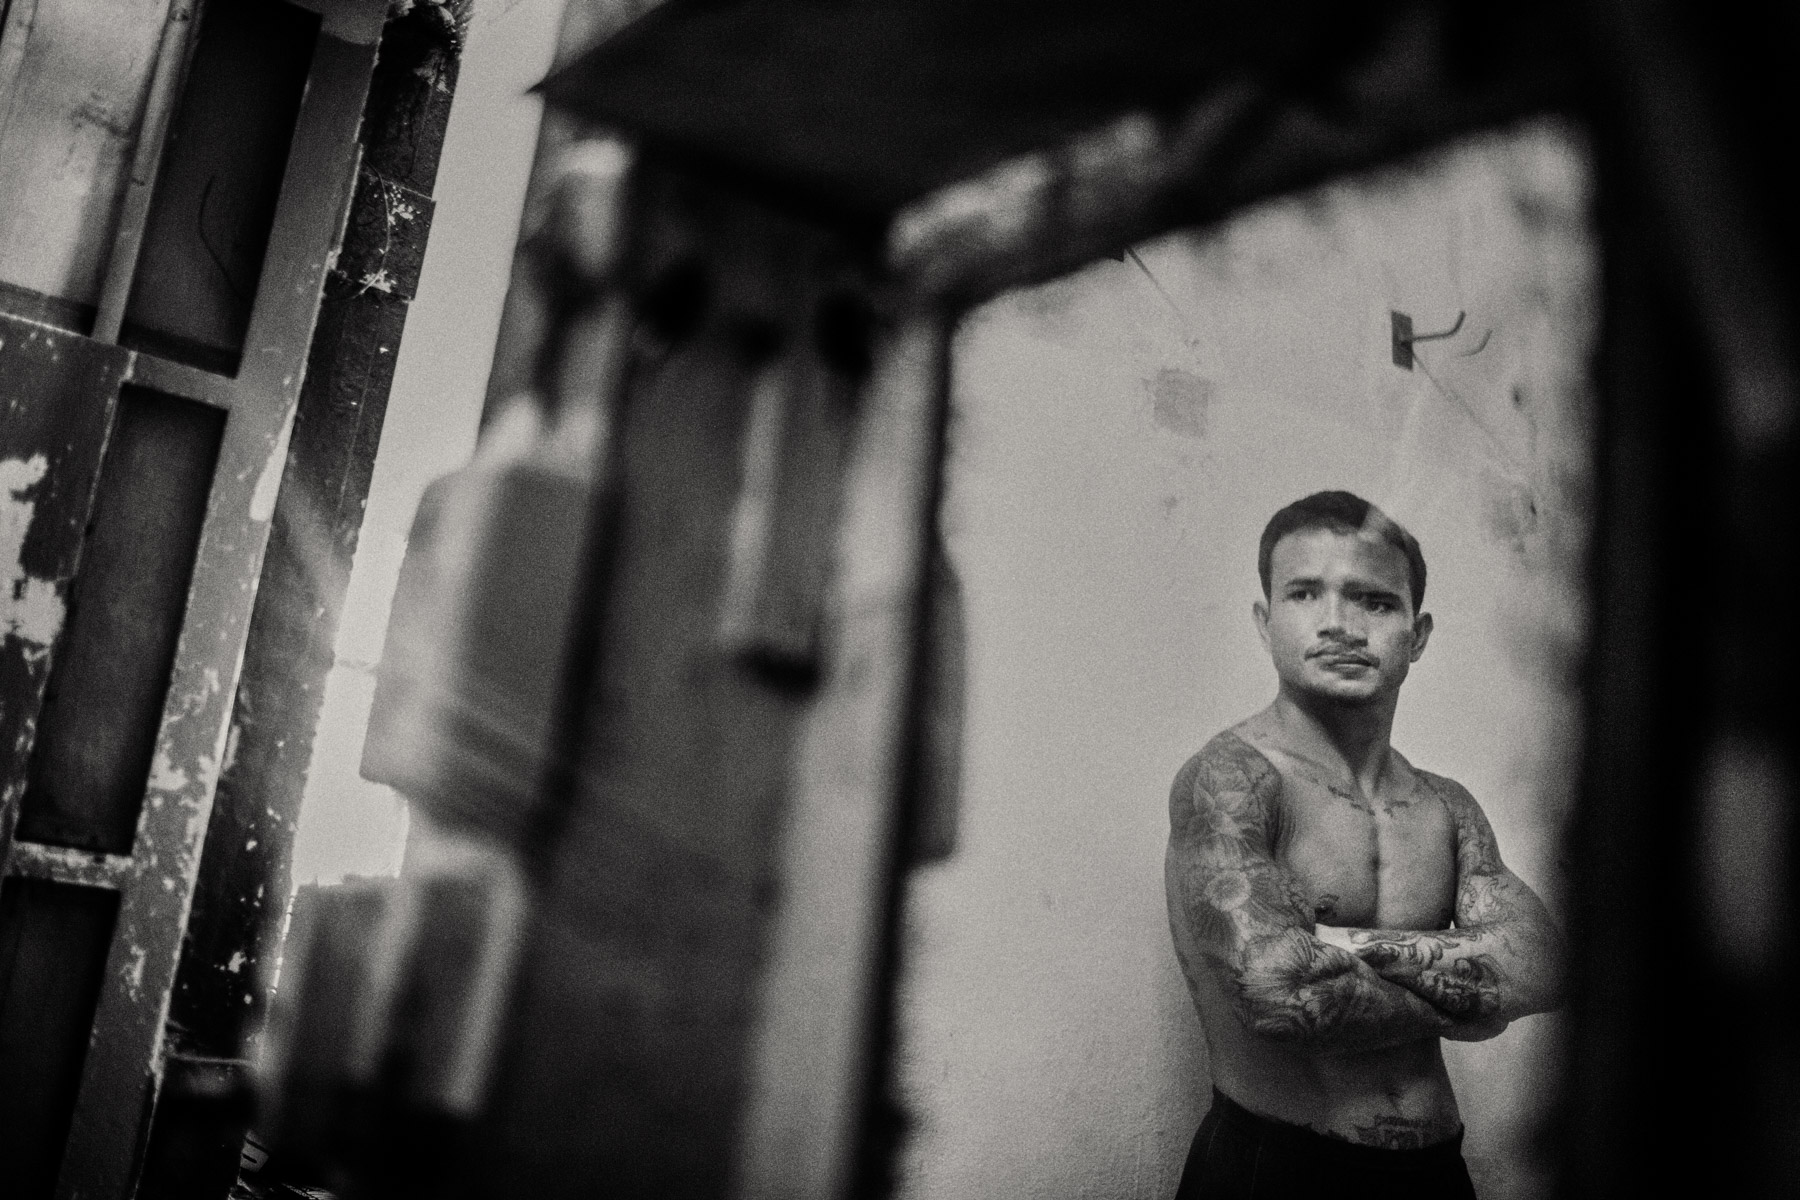 An inmate at Klong Prem prison in Bangkok, Thailand. The inmate is part of a program that pits prisoners against foreign Muay Thai fighters for a chance of reduced sentencing or early release.